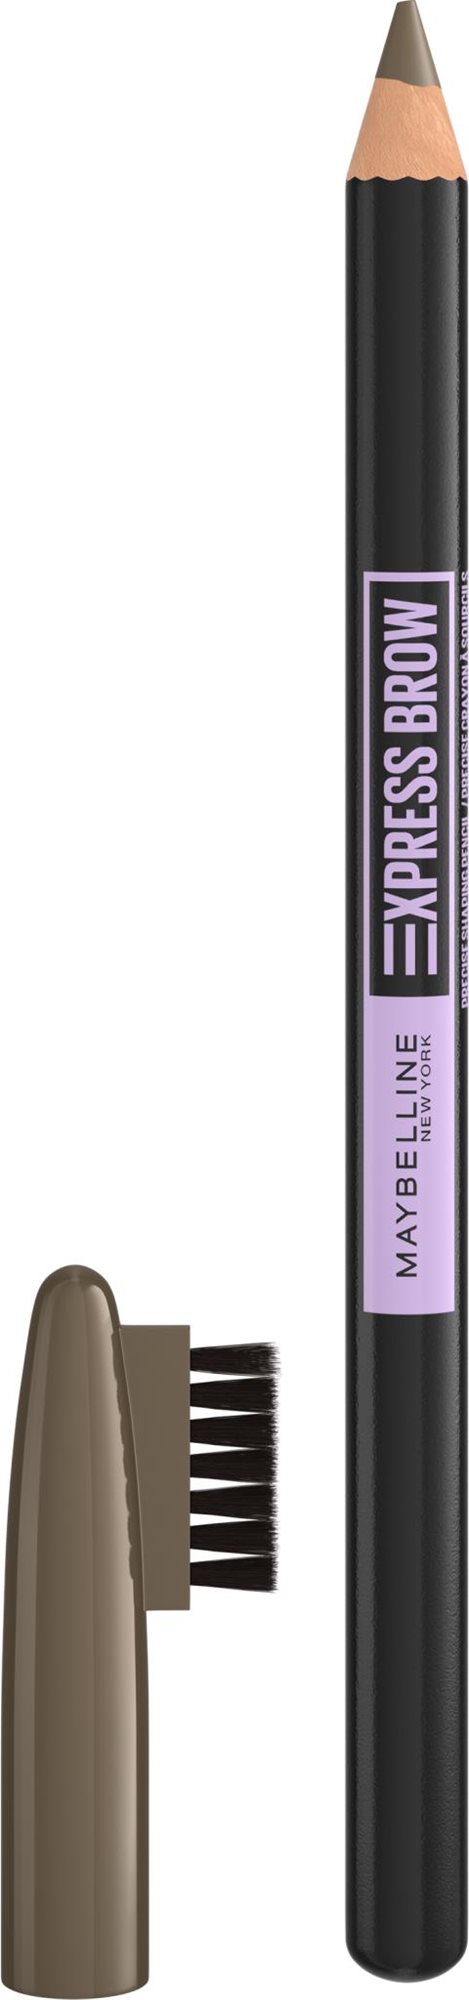 MAYBELLINE NEW YORK Express Brow Shaping Pencil 04 Medium Brown